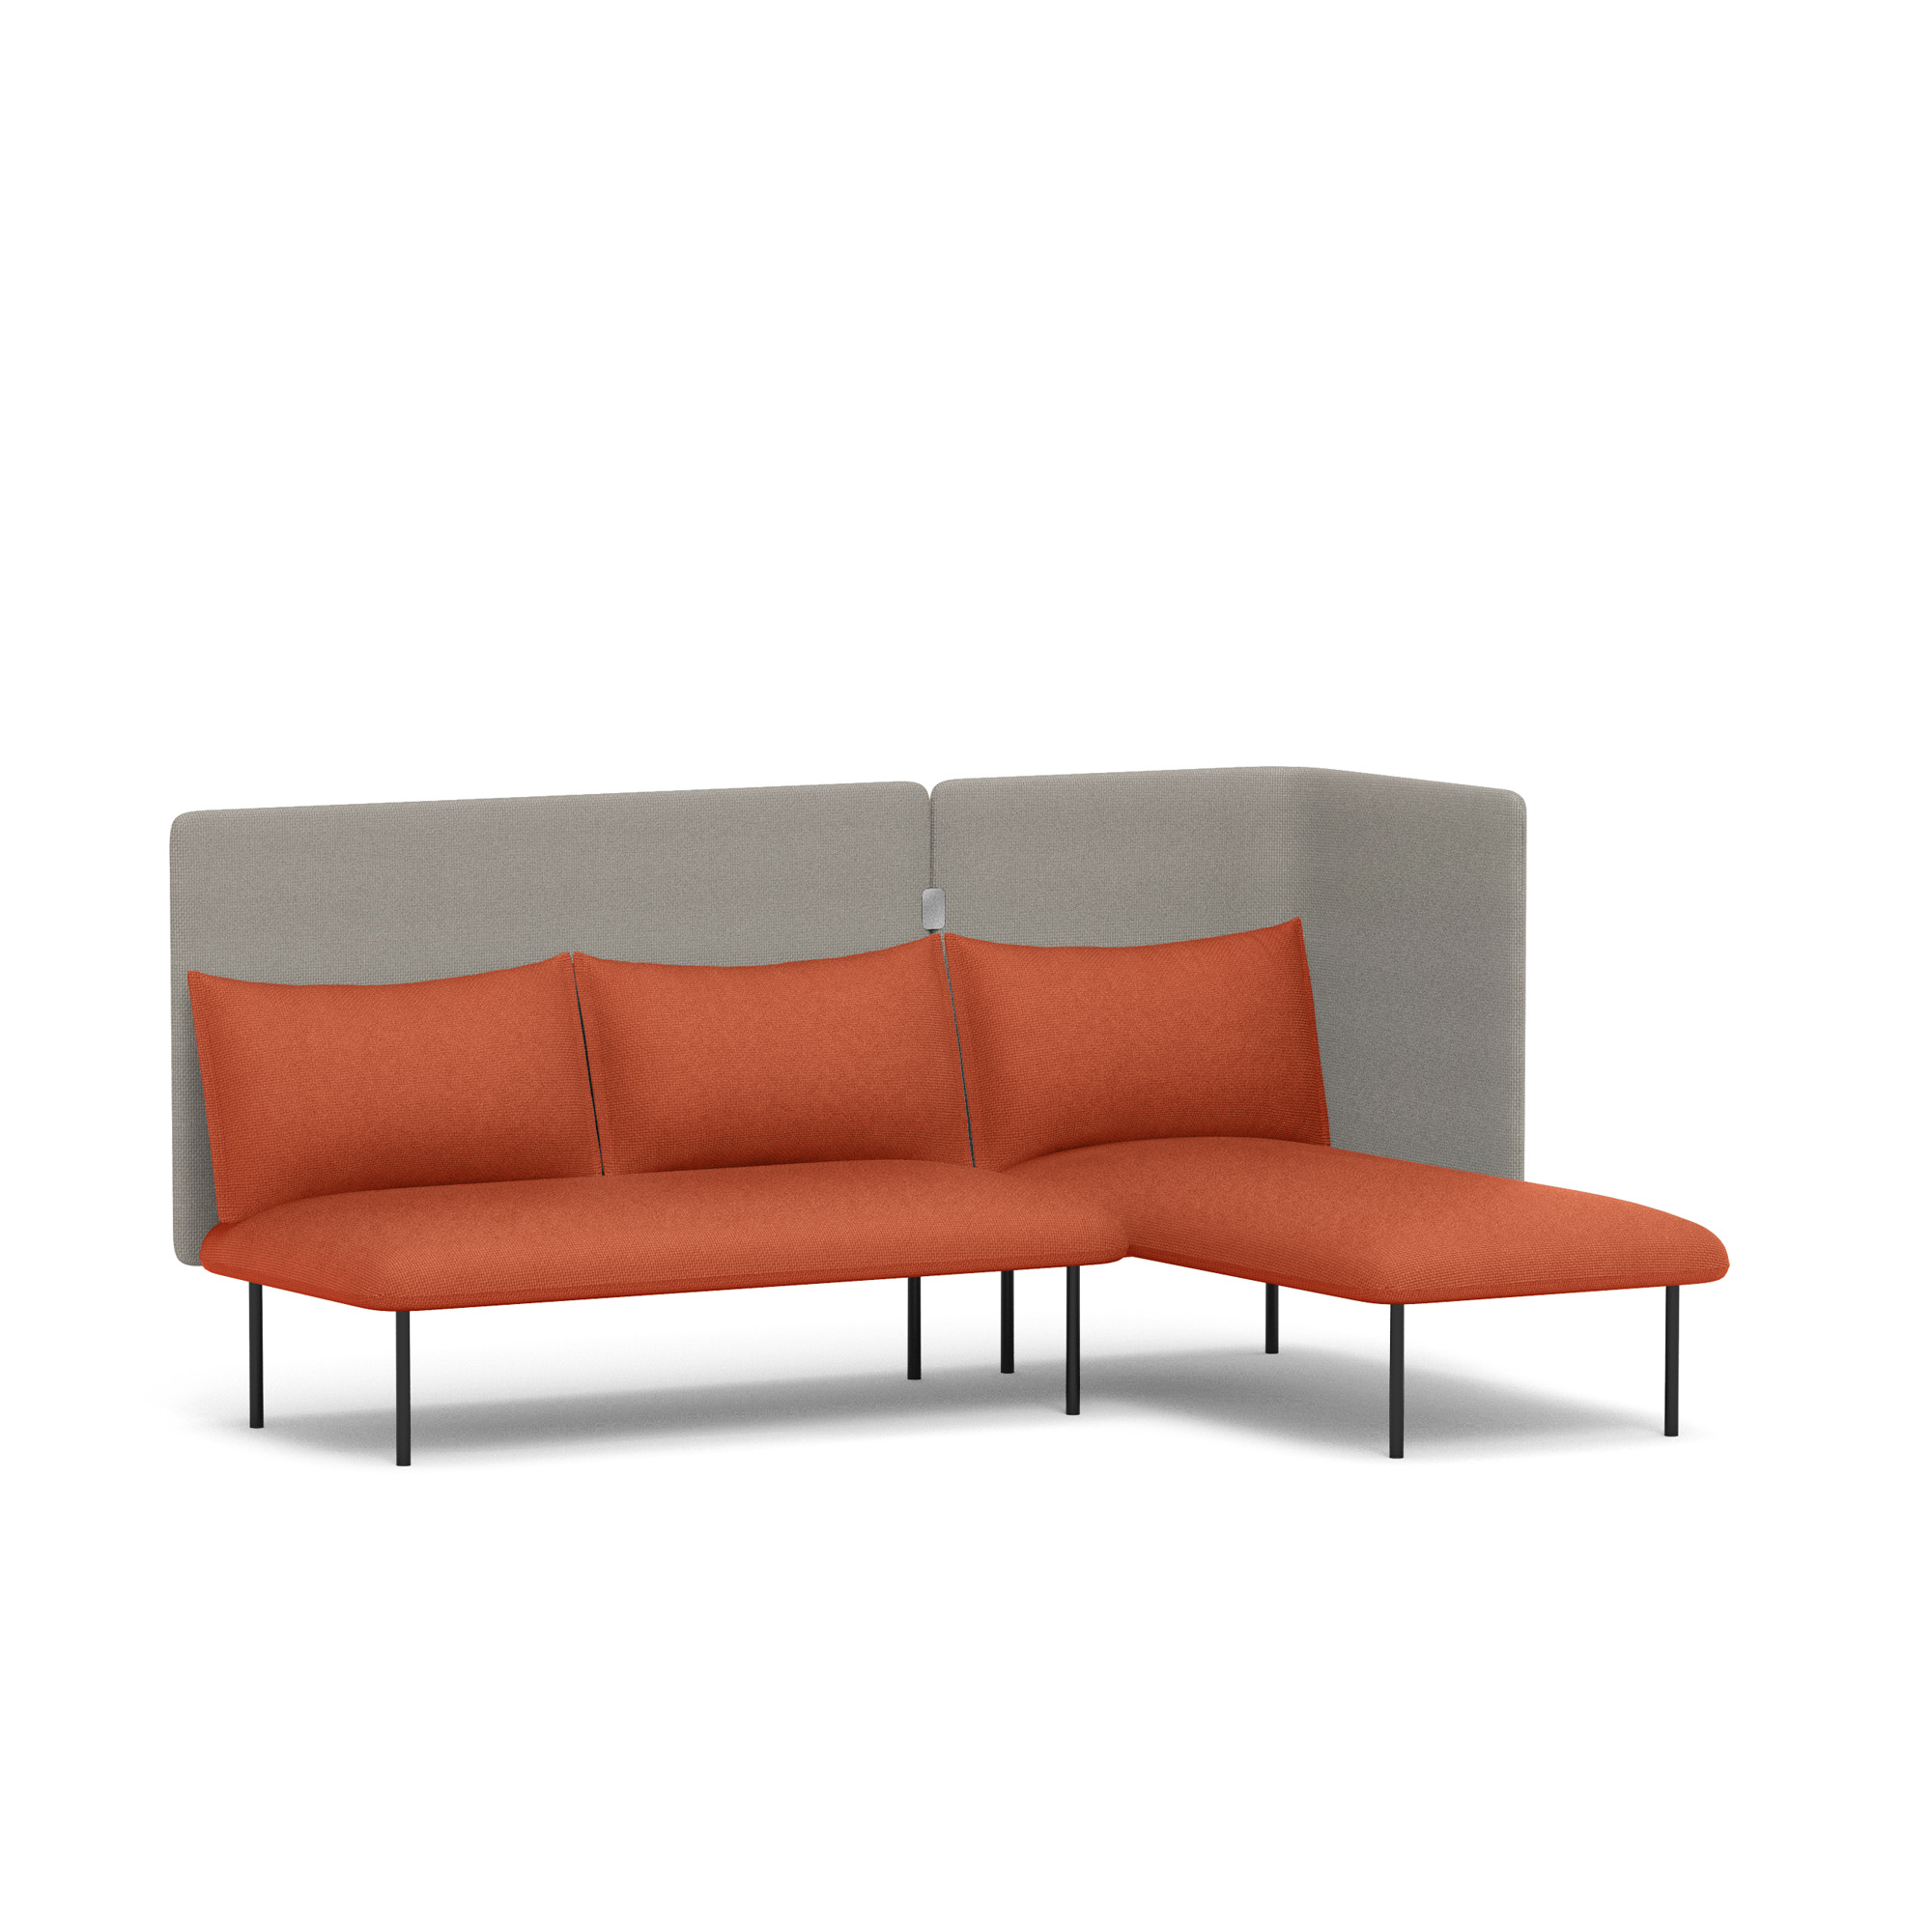 QT Adaptable Lounge Sofa + Right Chaise